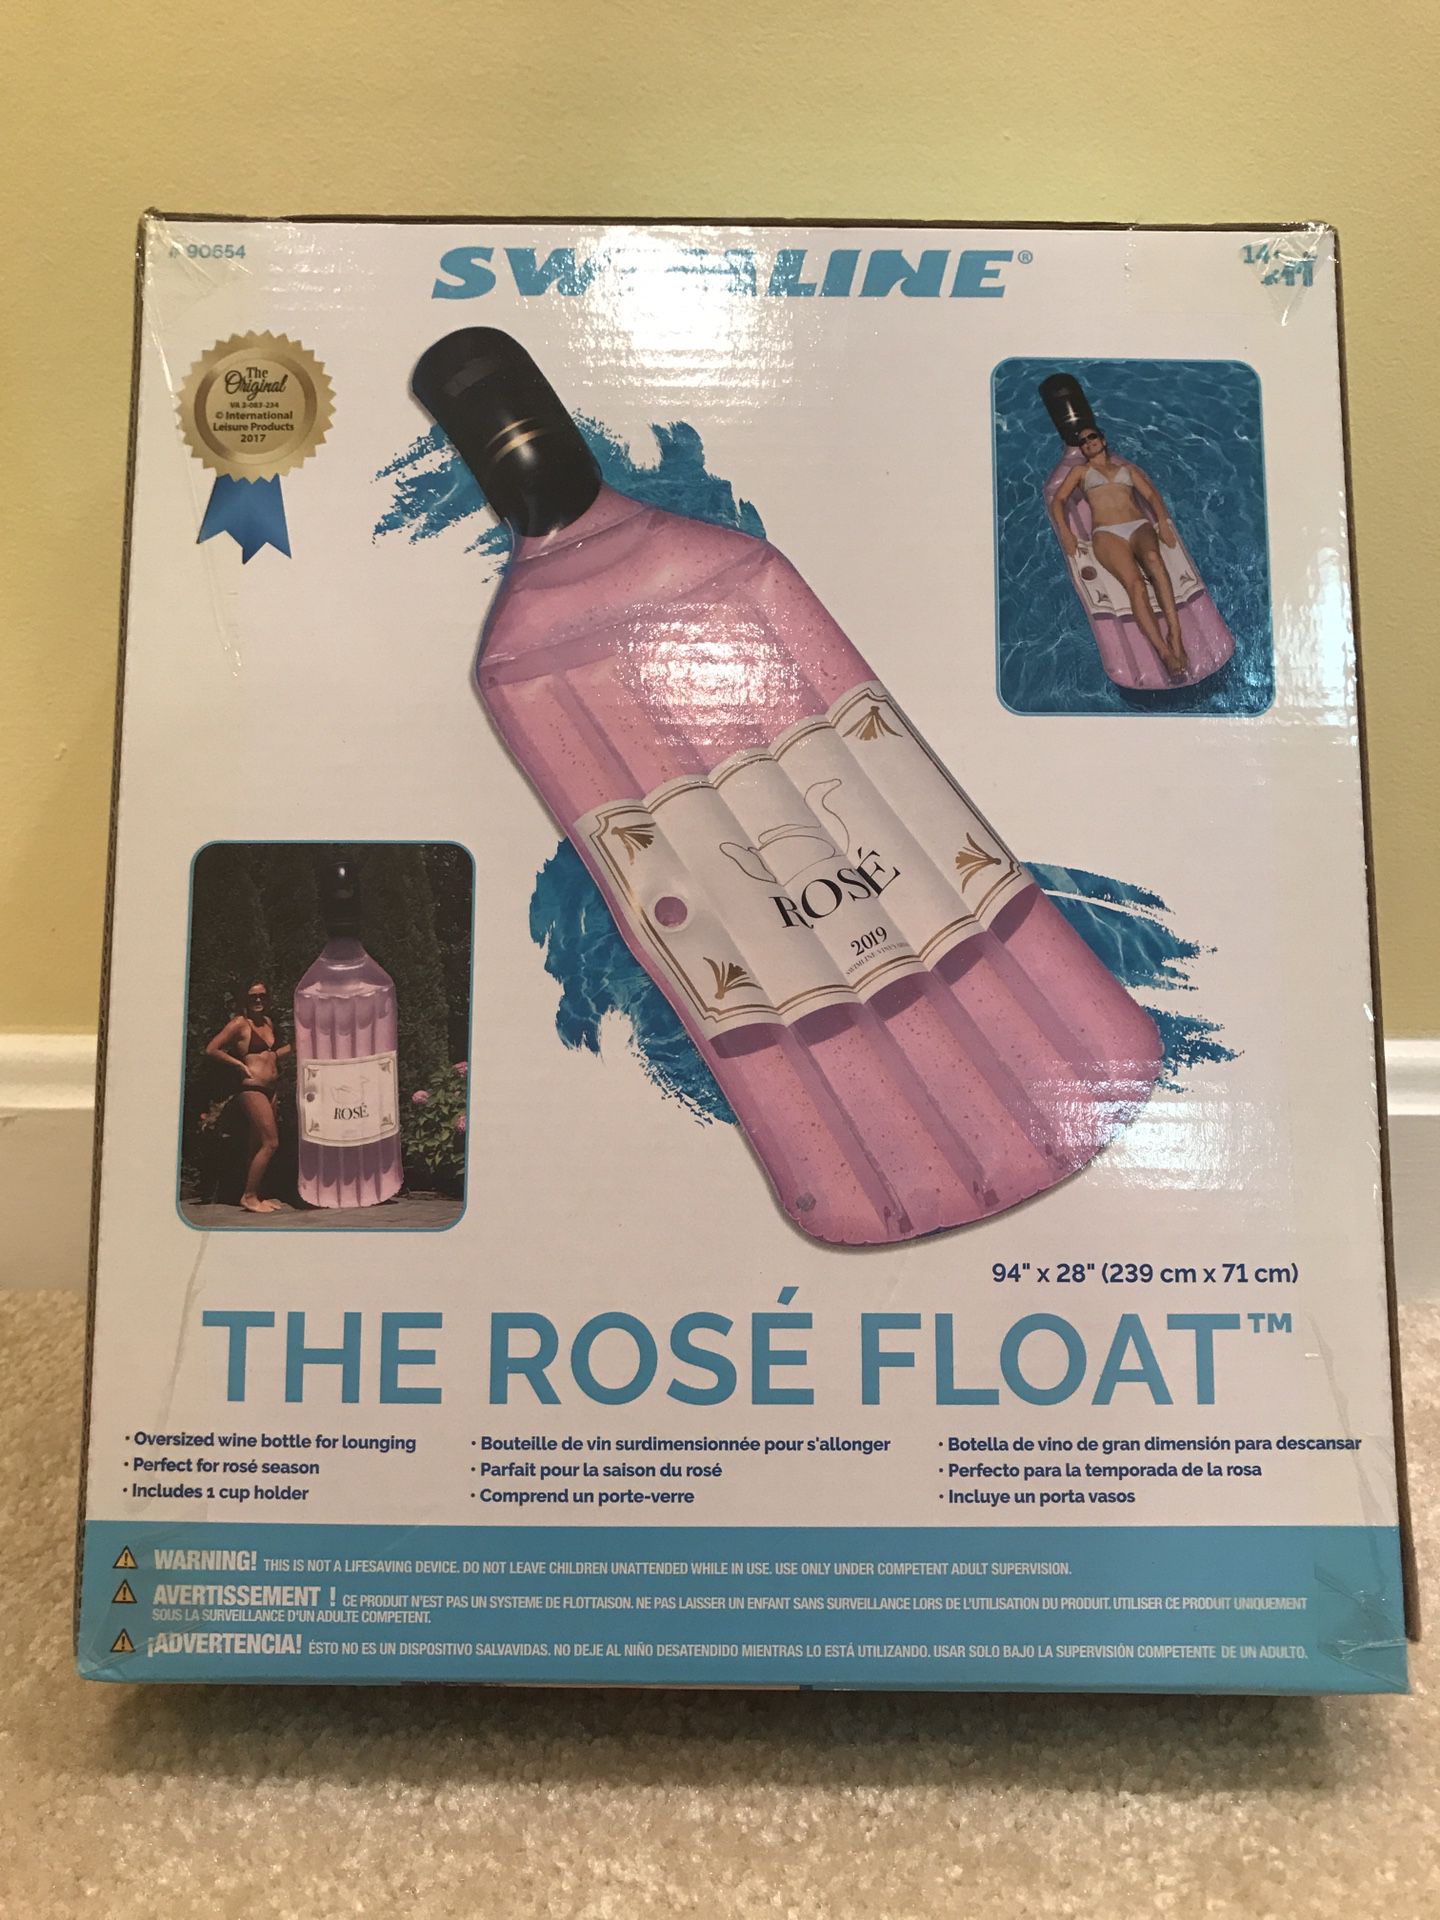 Swimline Inflatable Rose Float Lounger Swimming Pool Raft 94 x 28 Inches